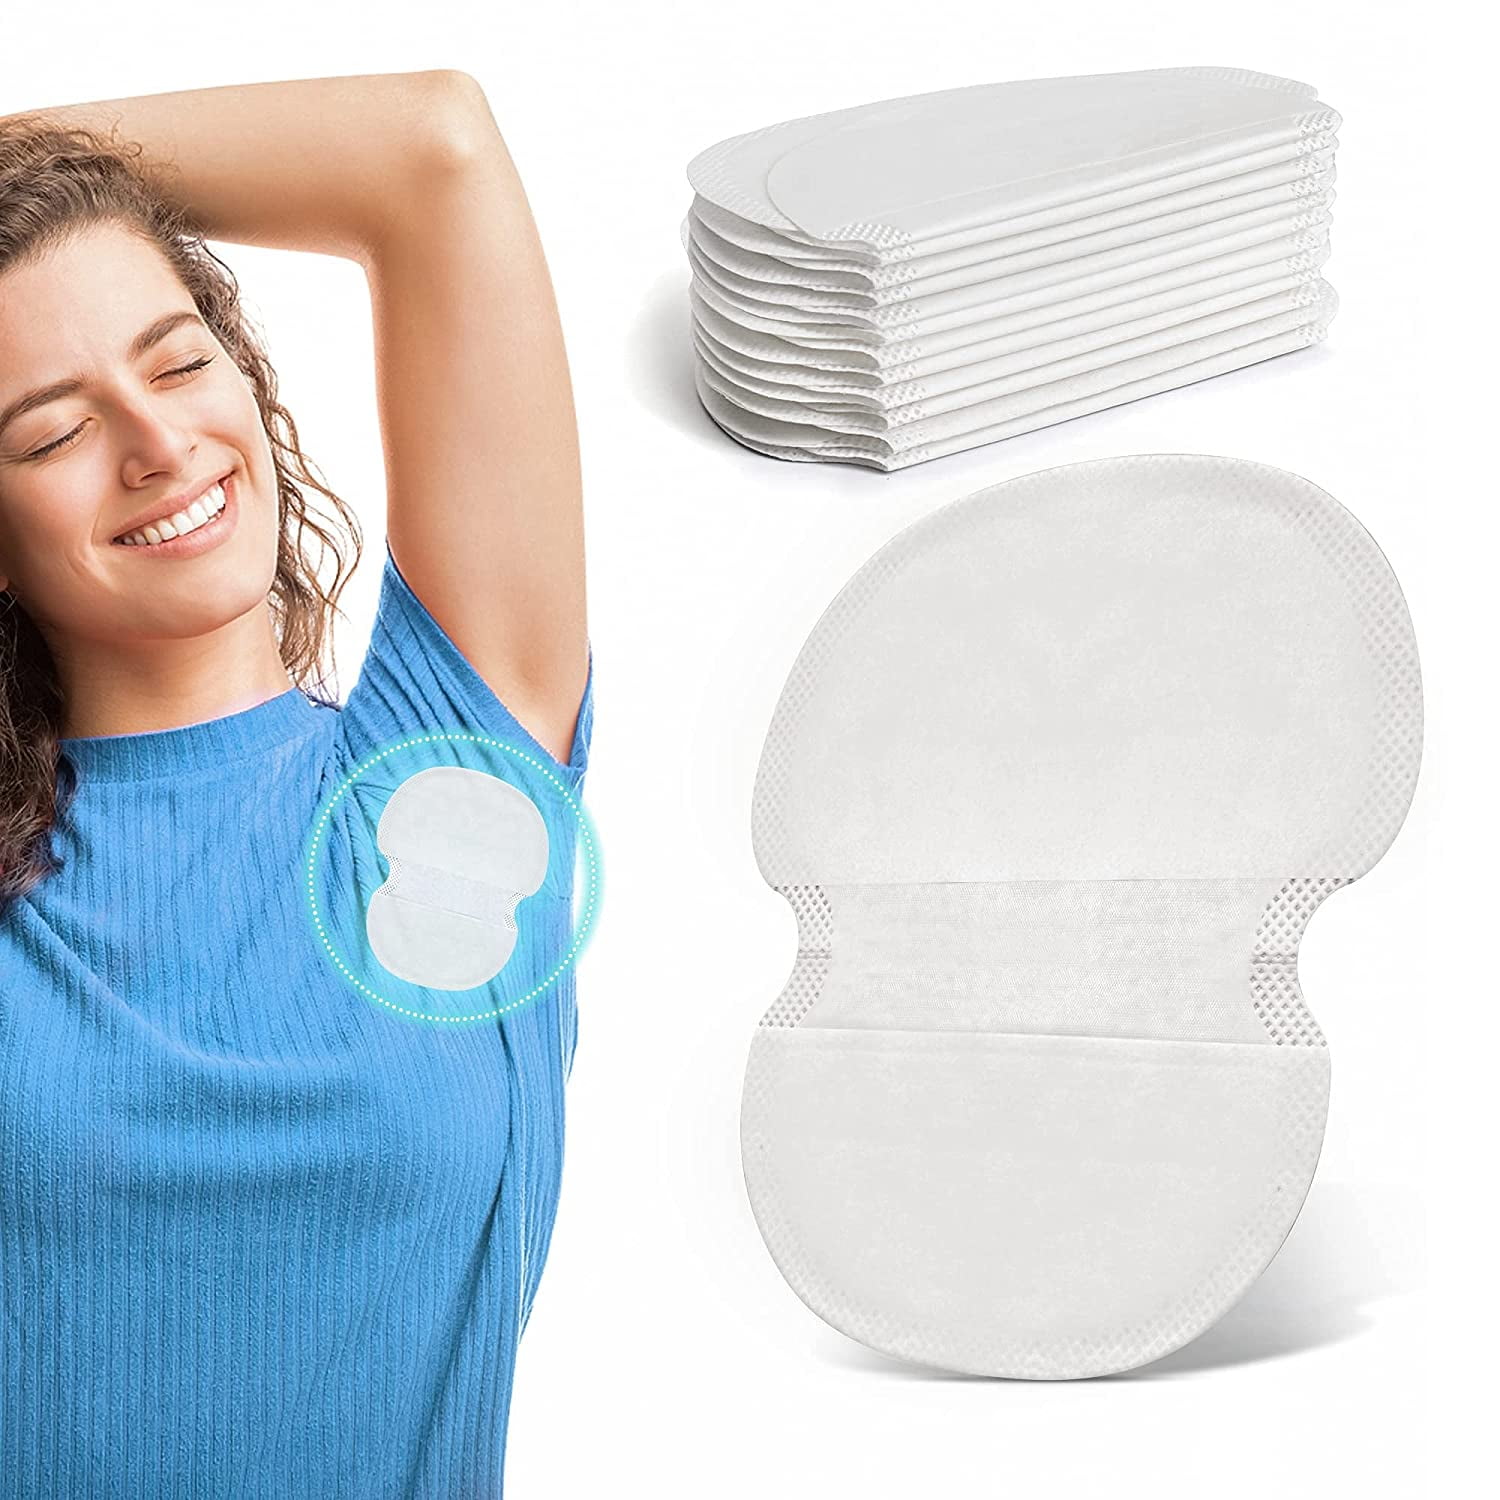 Sweating,body odour,patches 10 SWEAT PADS,DRESS SHIELDS by AXILLA-shield ™ 